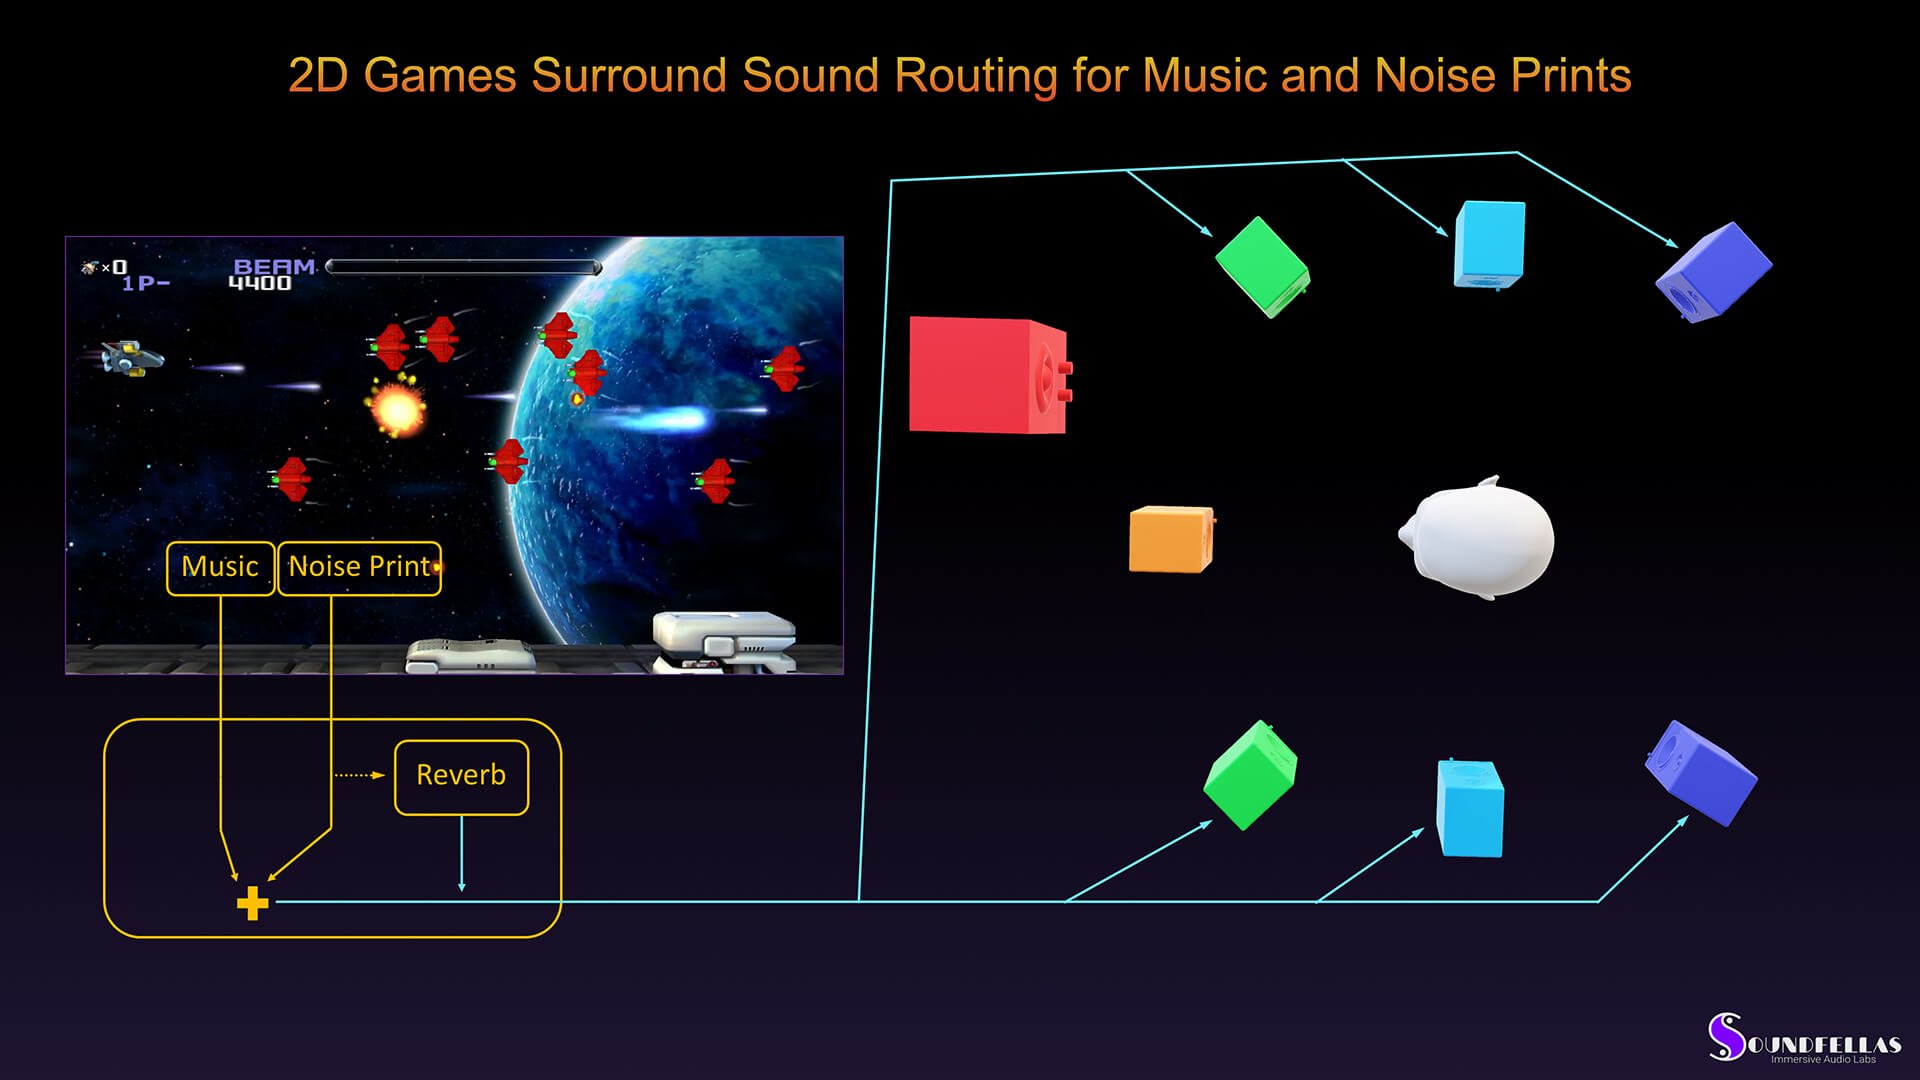 Image of 2D game surround sound routing for music and noise prints.